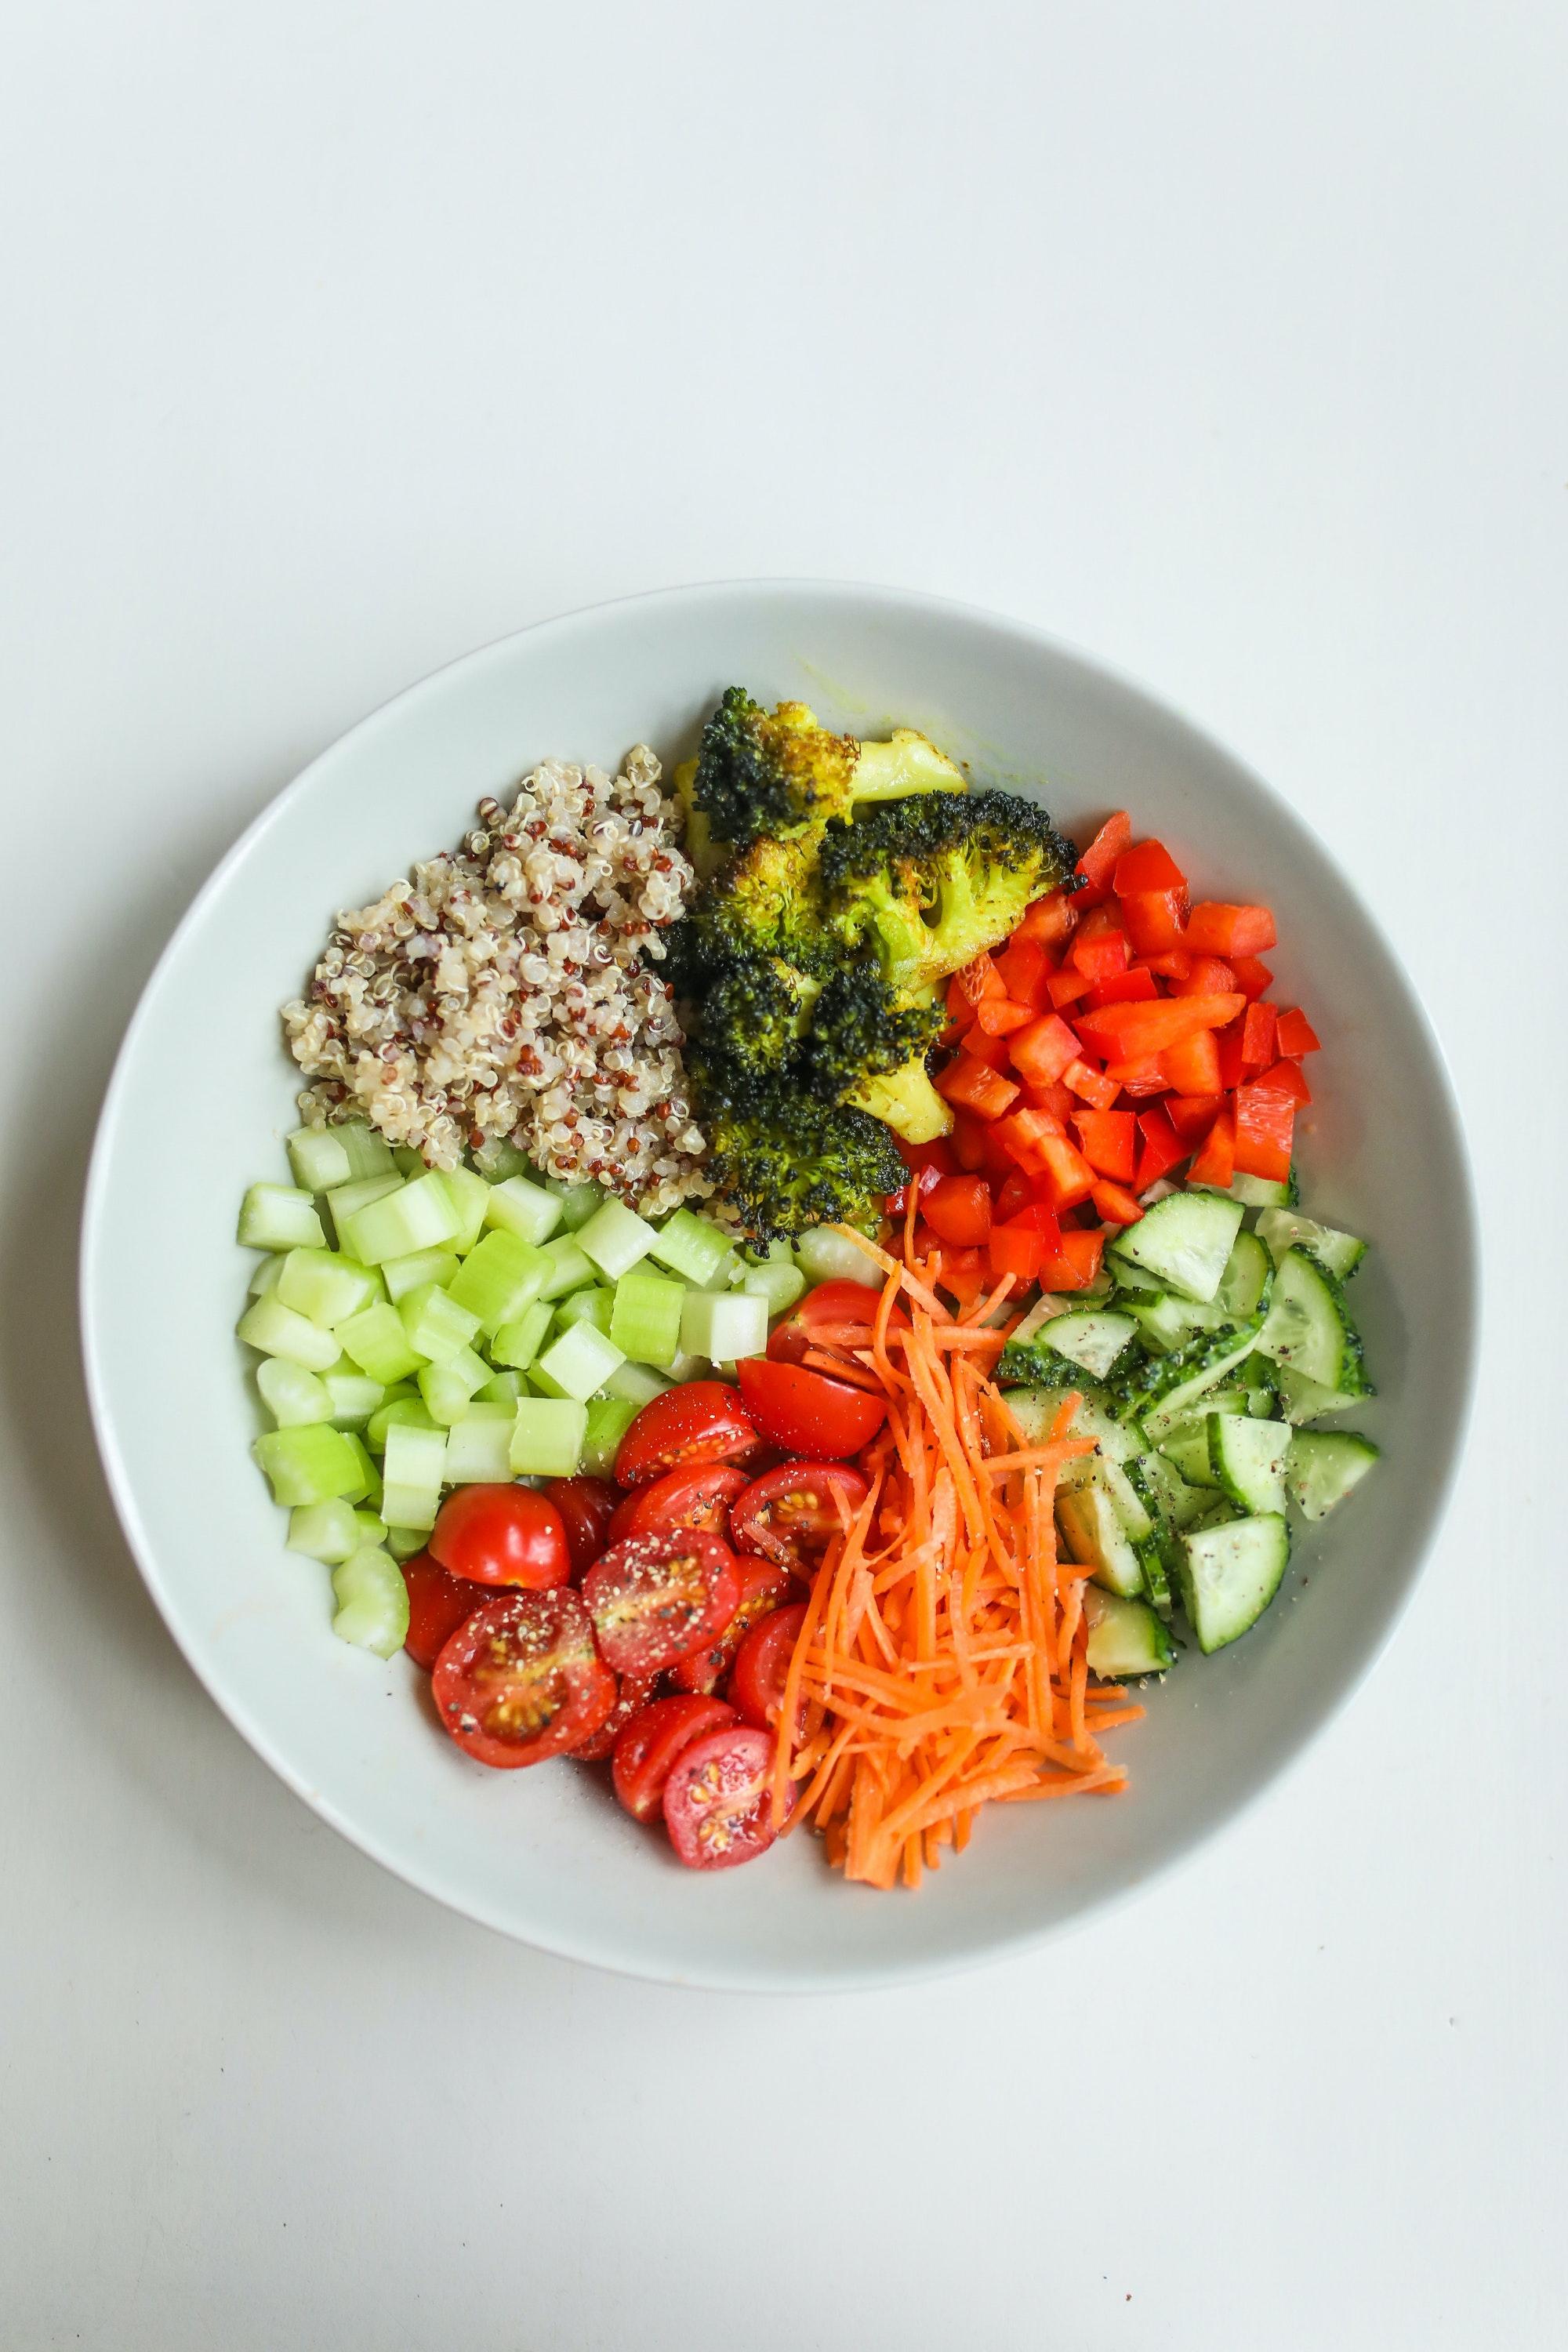 White bowl of carrots, cucumber, tomatoes, red bell pepper, broccoli, and quinoa on a white background.